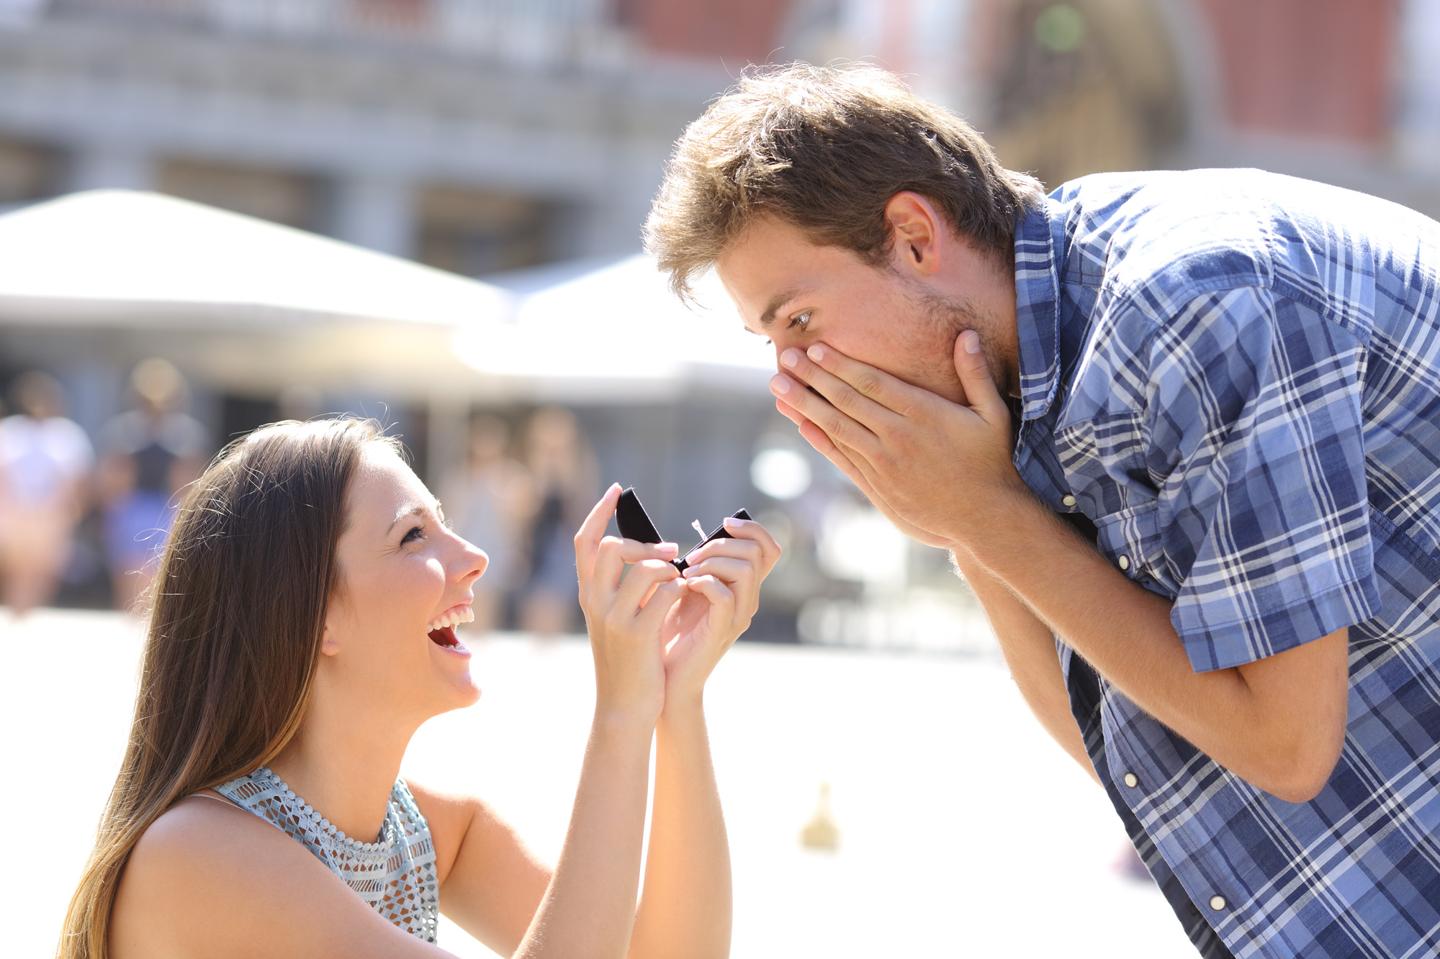 Should you buy a diamond ring for him when you want to propose?